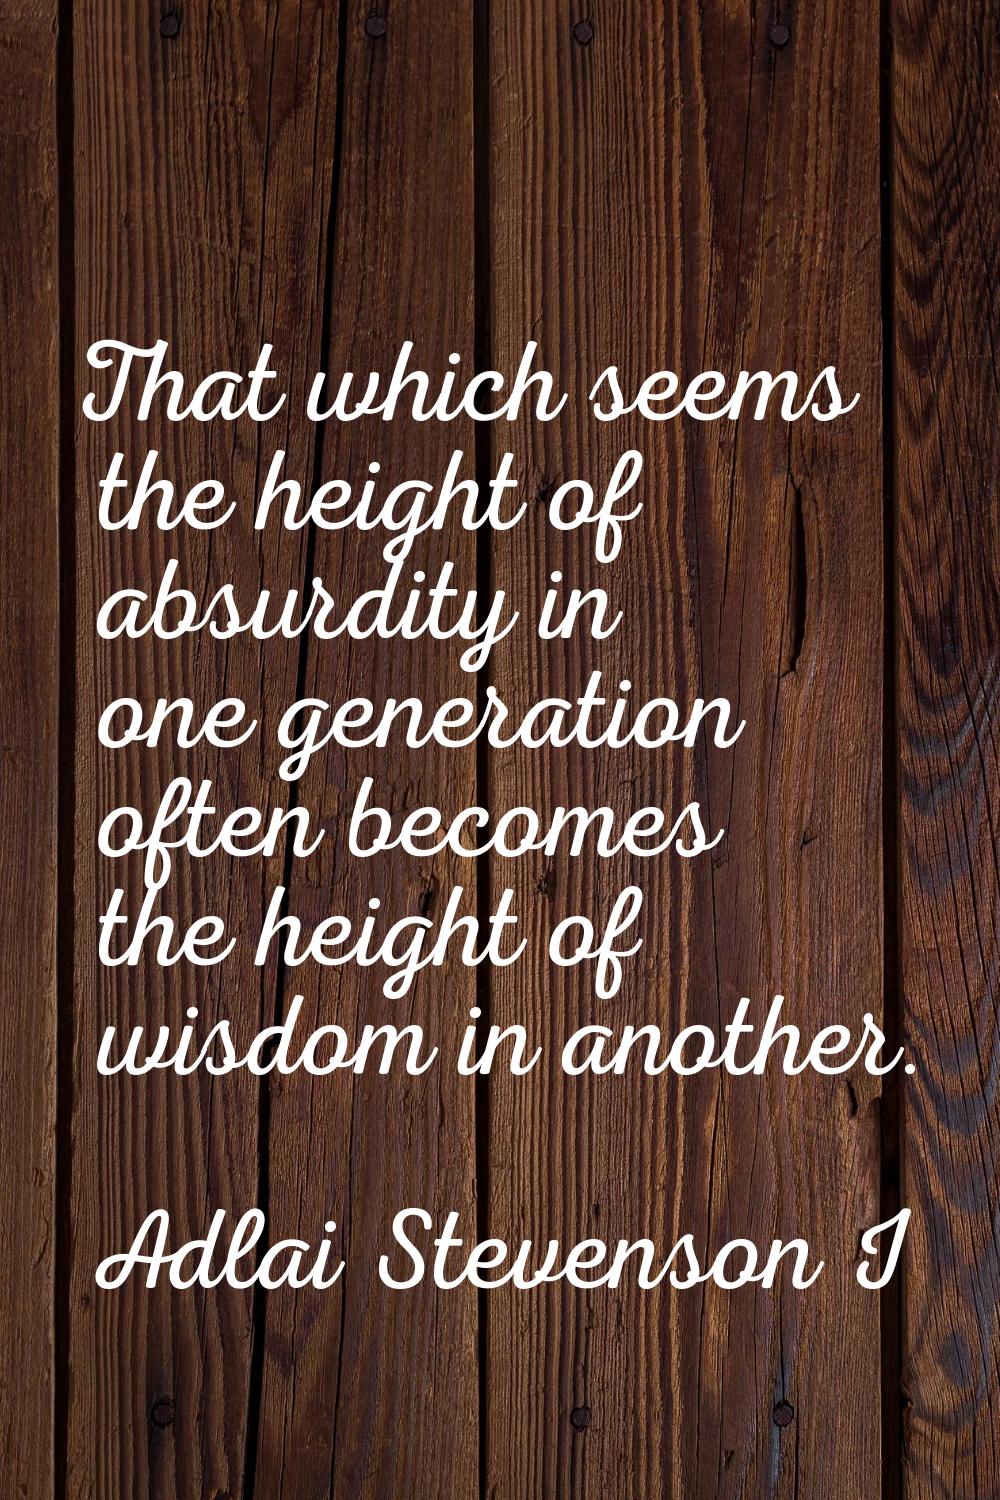 That which seems the height of absurdity in one generation often becomes the height of wisdom in an